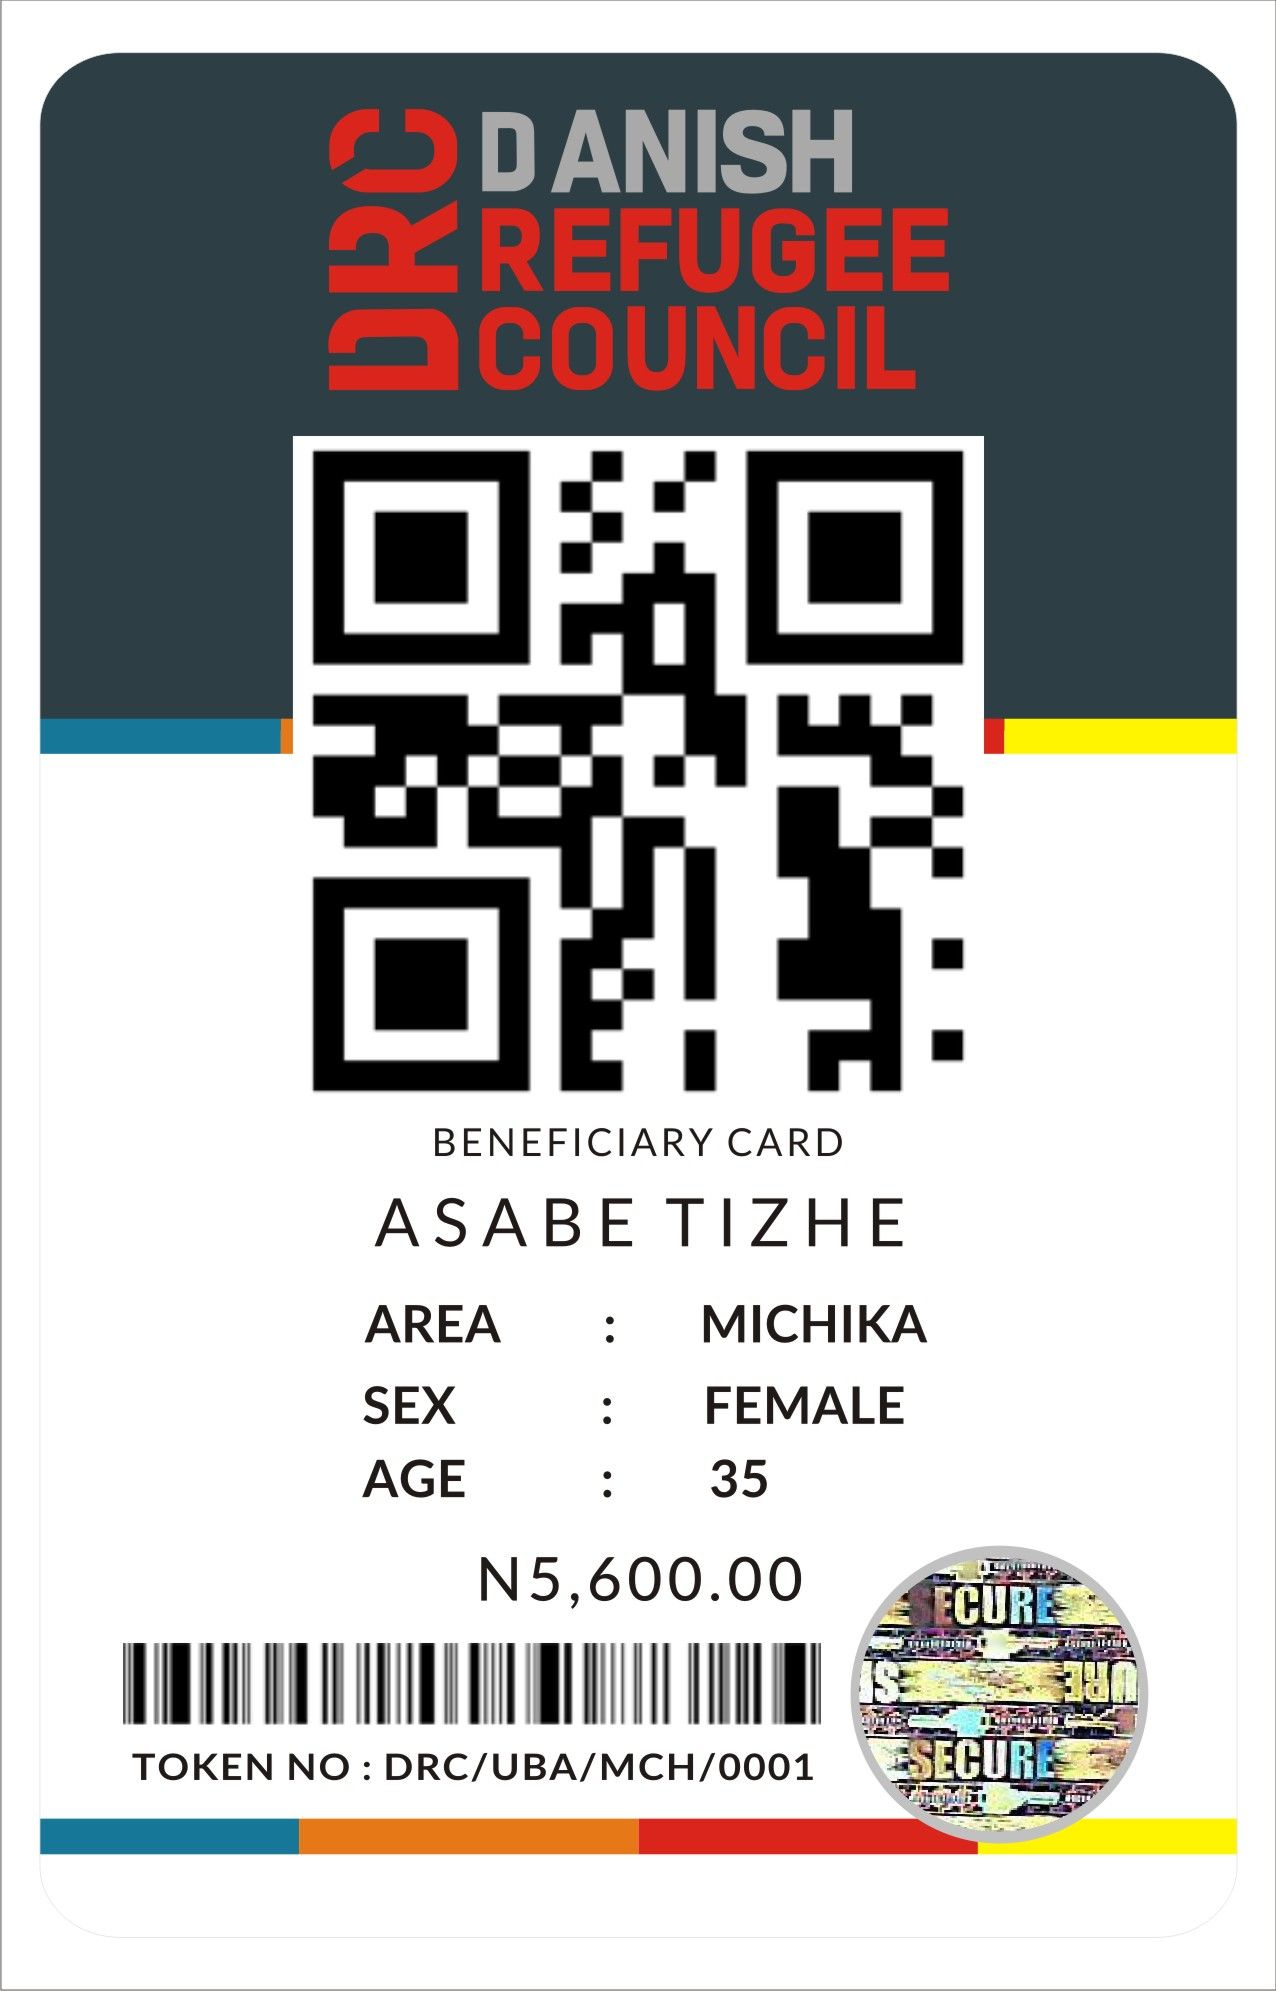 CALL CHINEDU ON 09022536974 TO PRINT BAR CODE STICKERS, QR CODE STICKERS